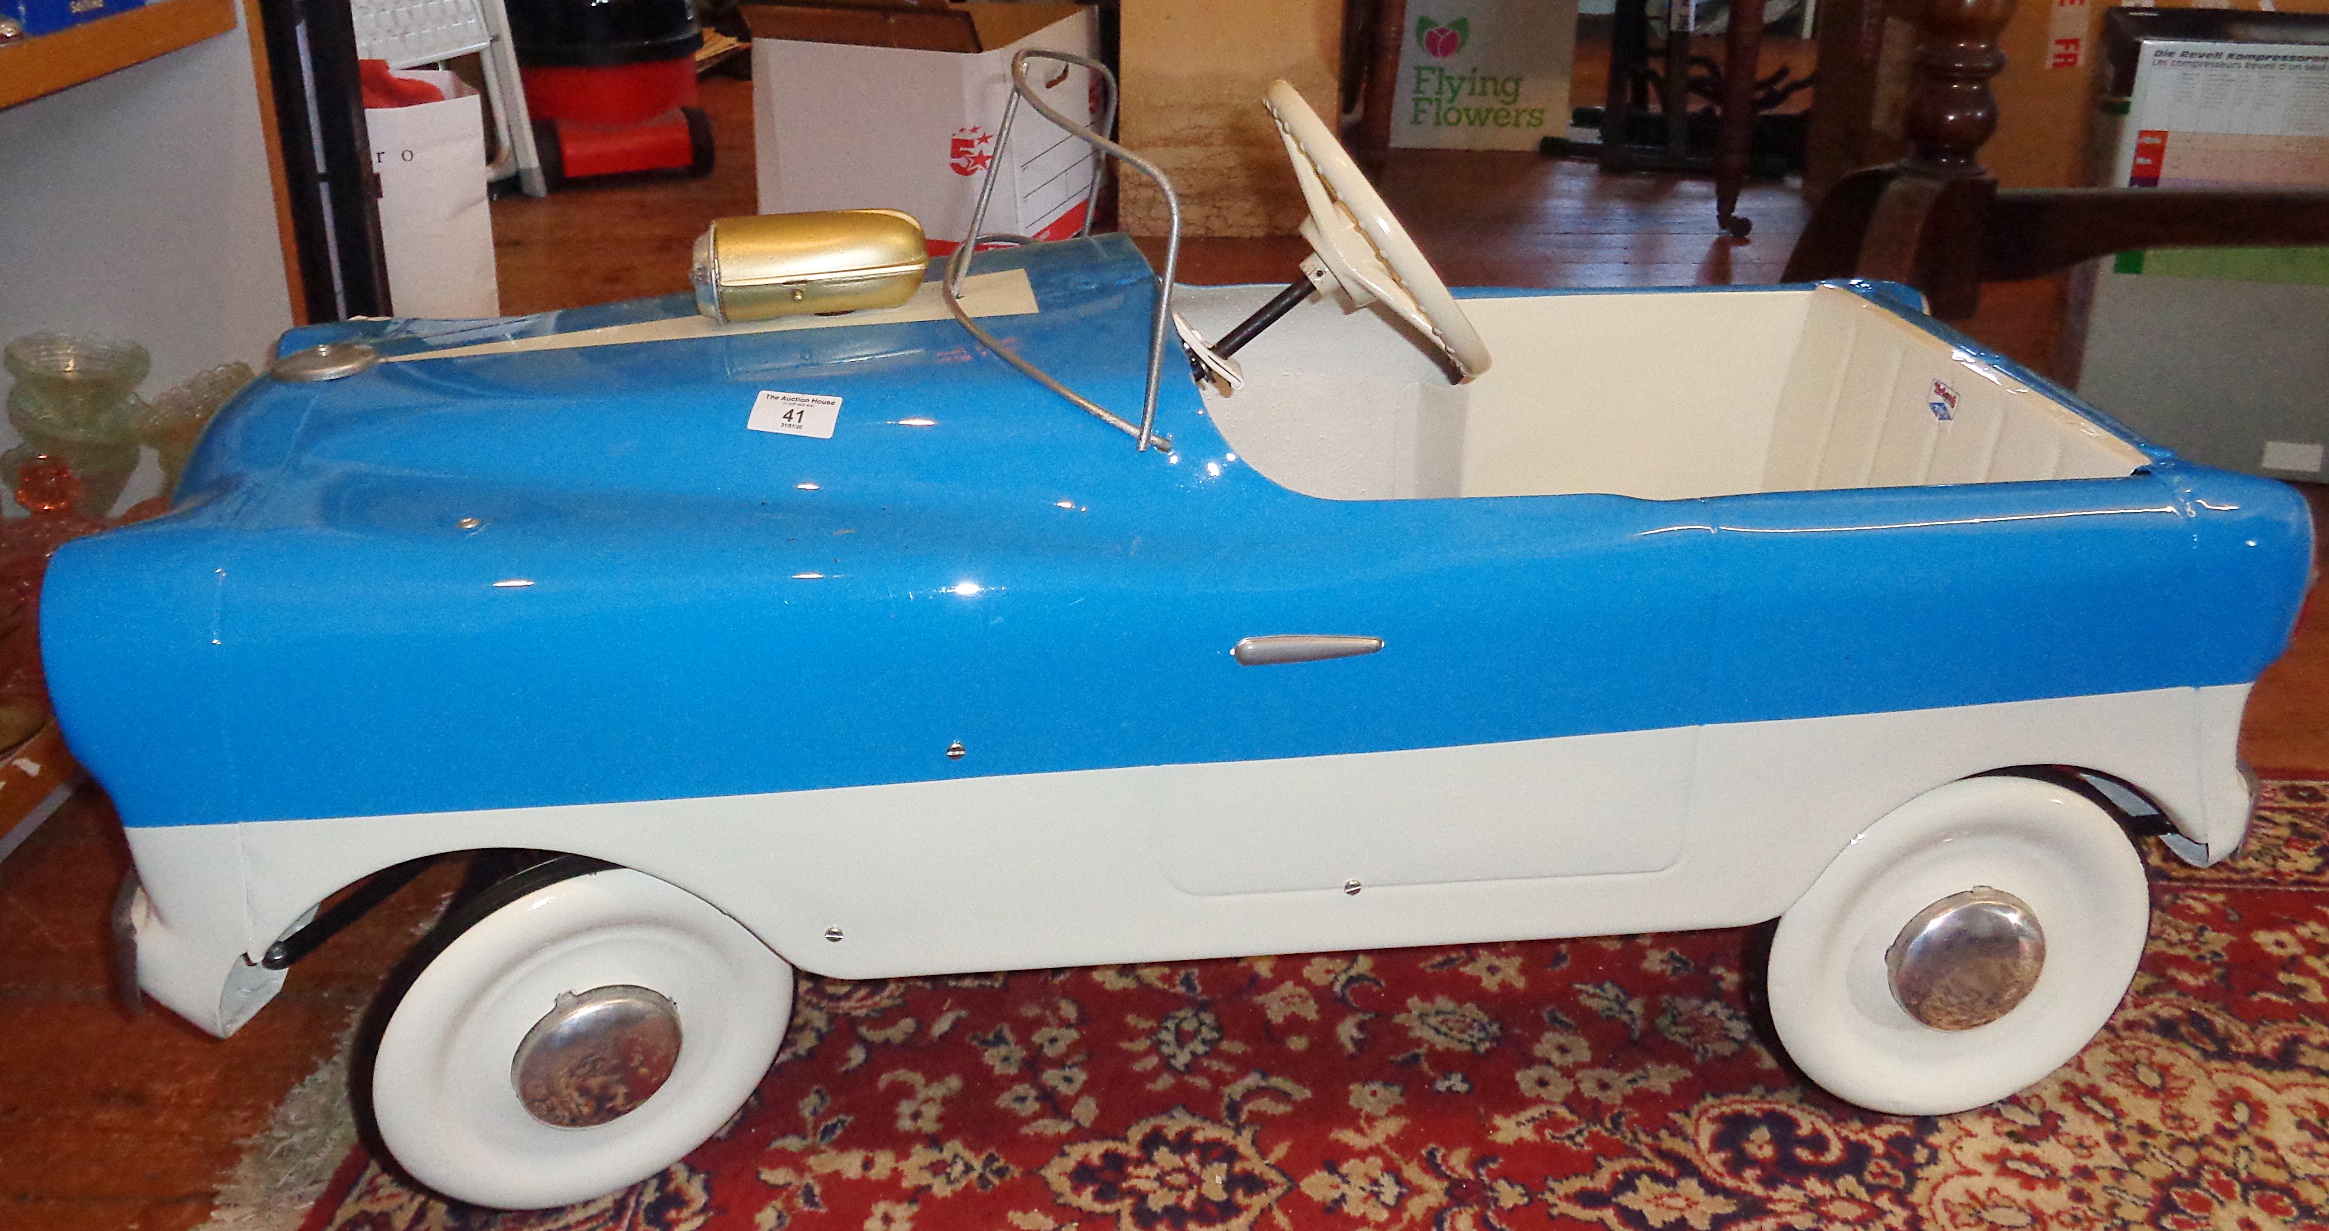 Tri-ang Ford Zephyr Pedal Car, c.1950's (professionally re-sprayed) - Image 2 of 2